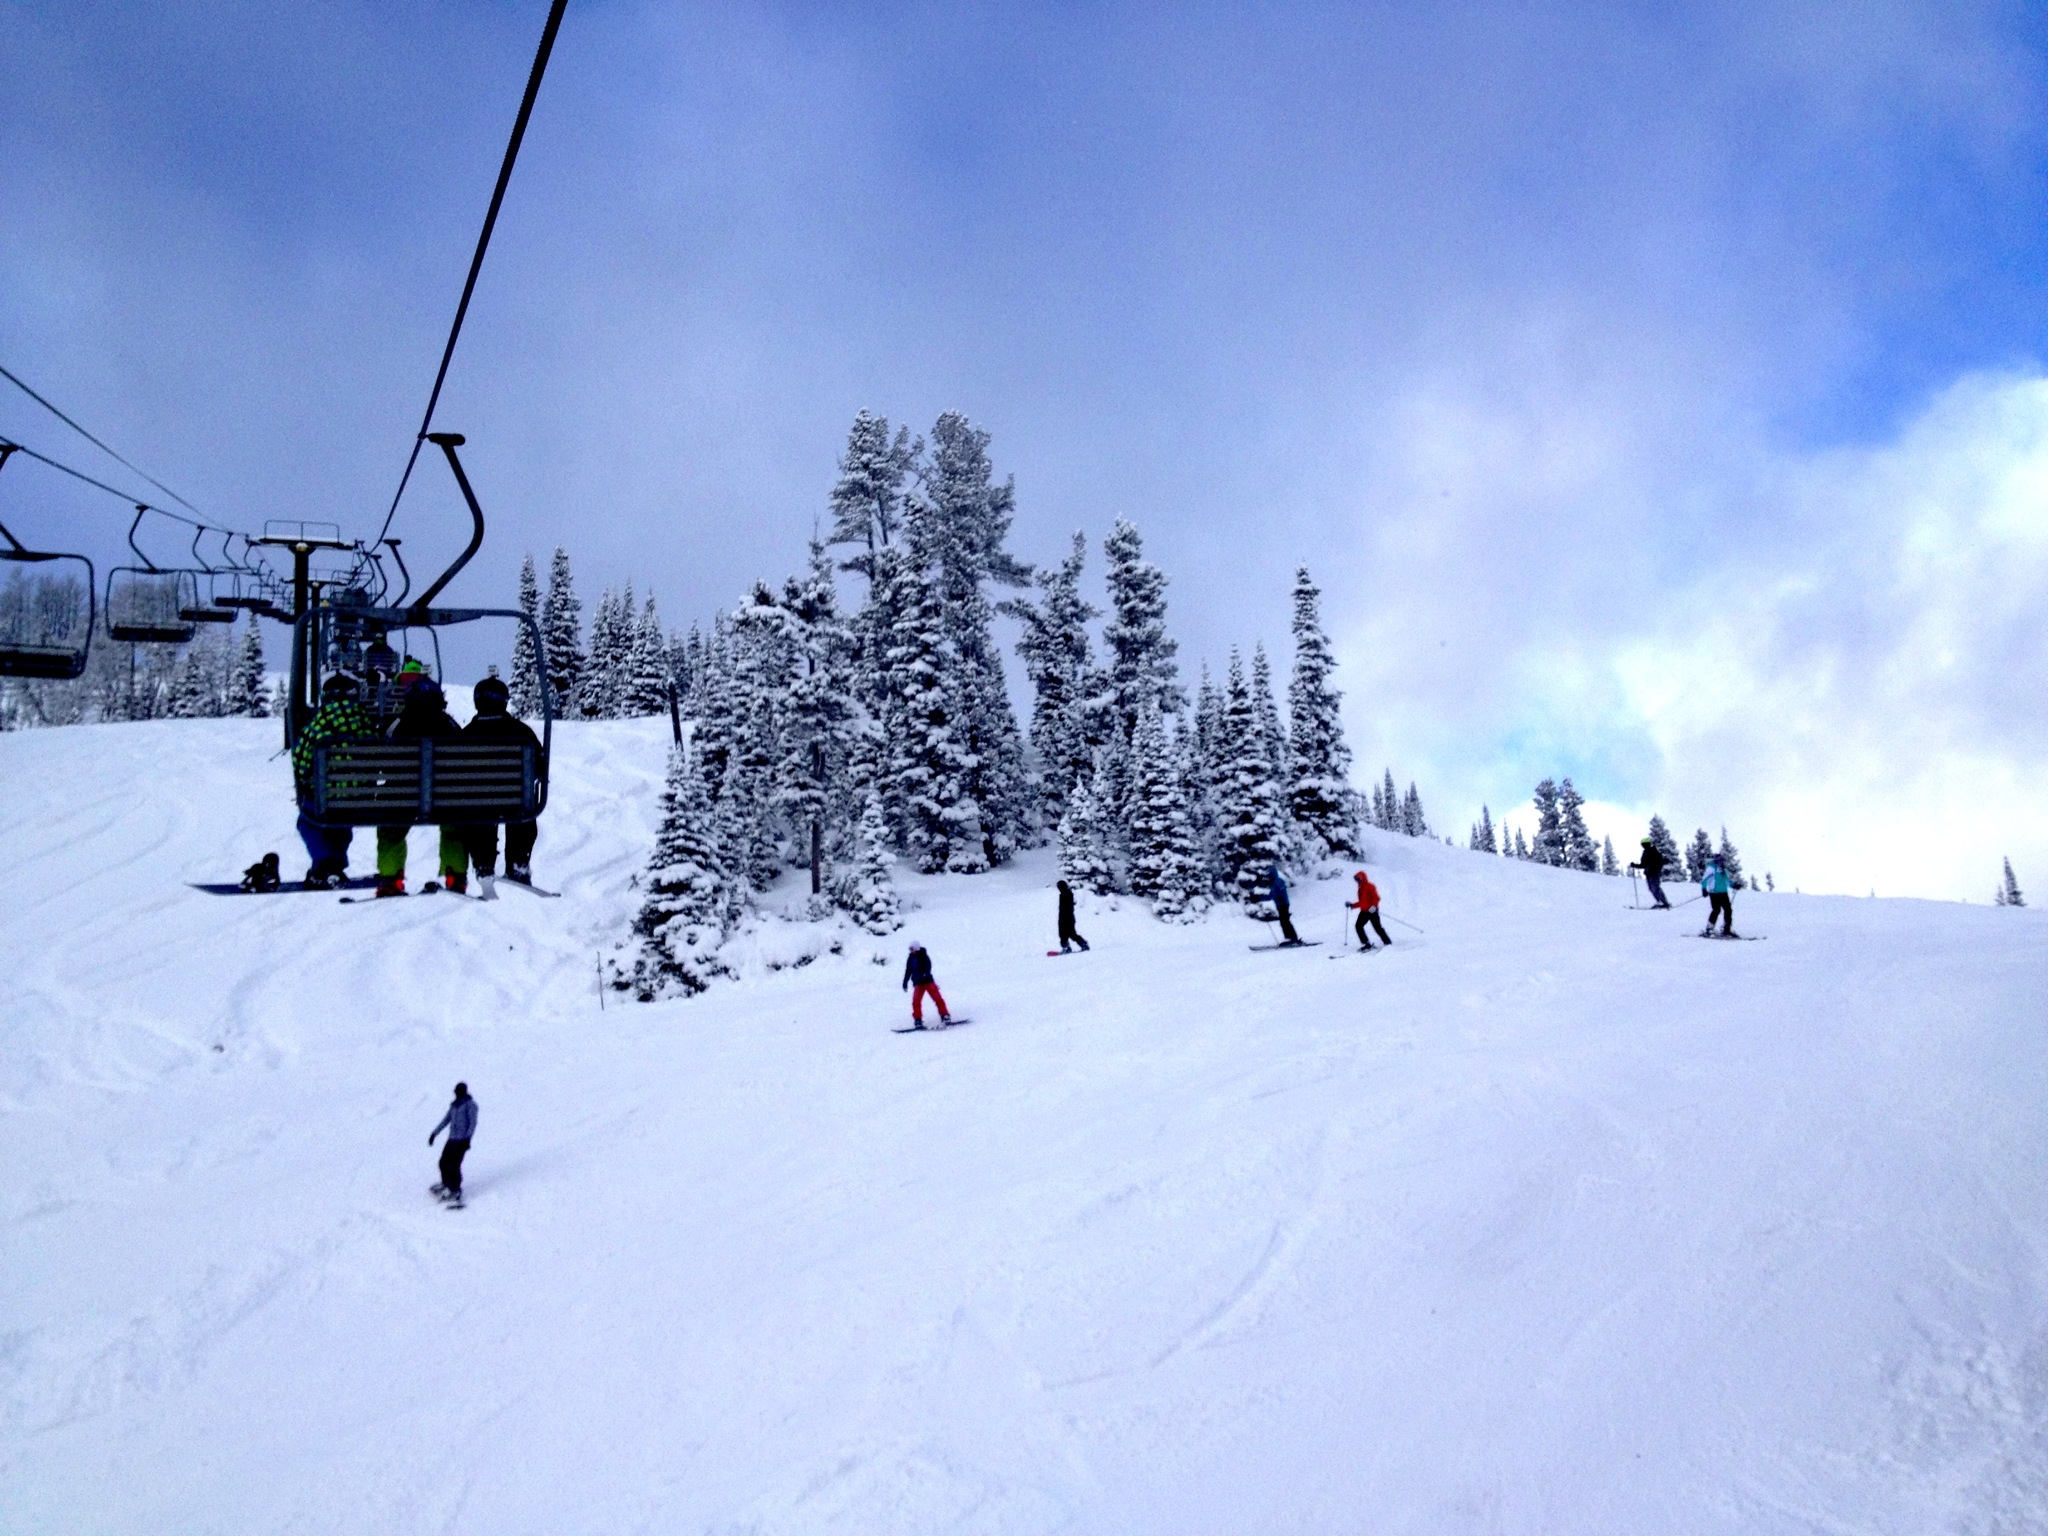 Chairlift and skiers at Showdown ski area